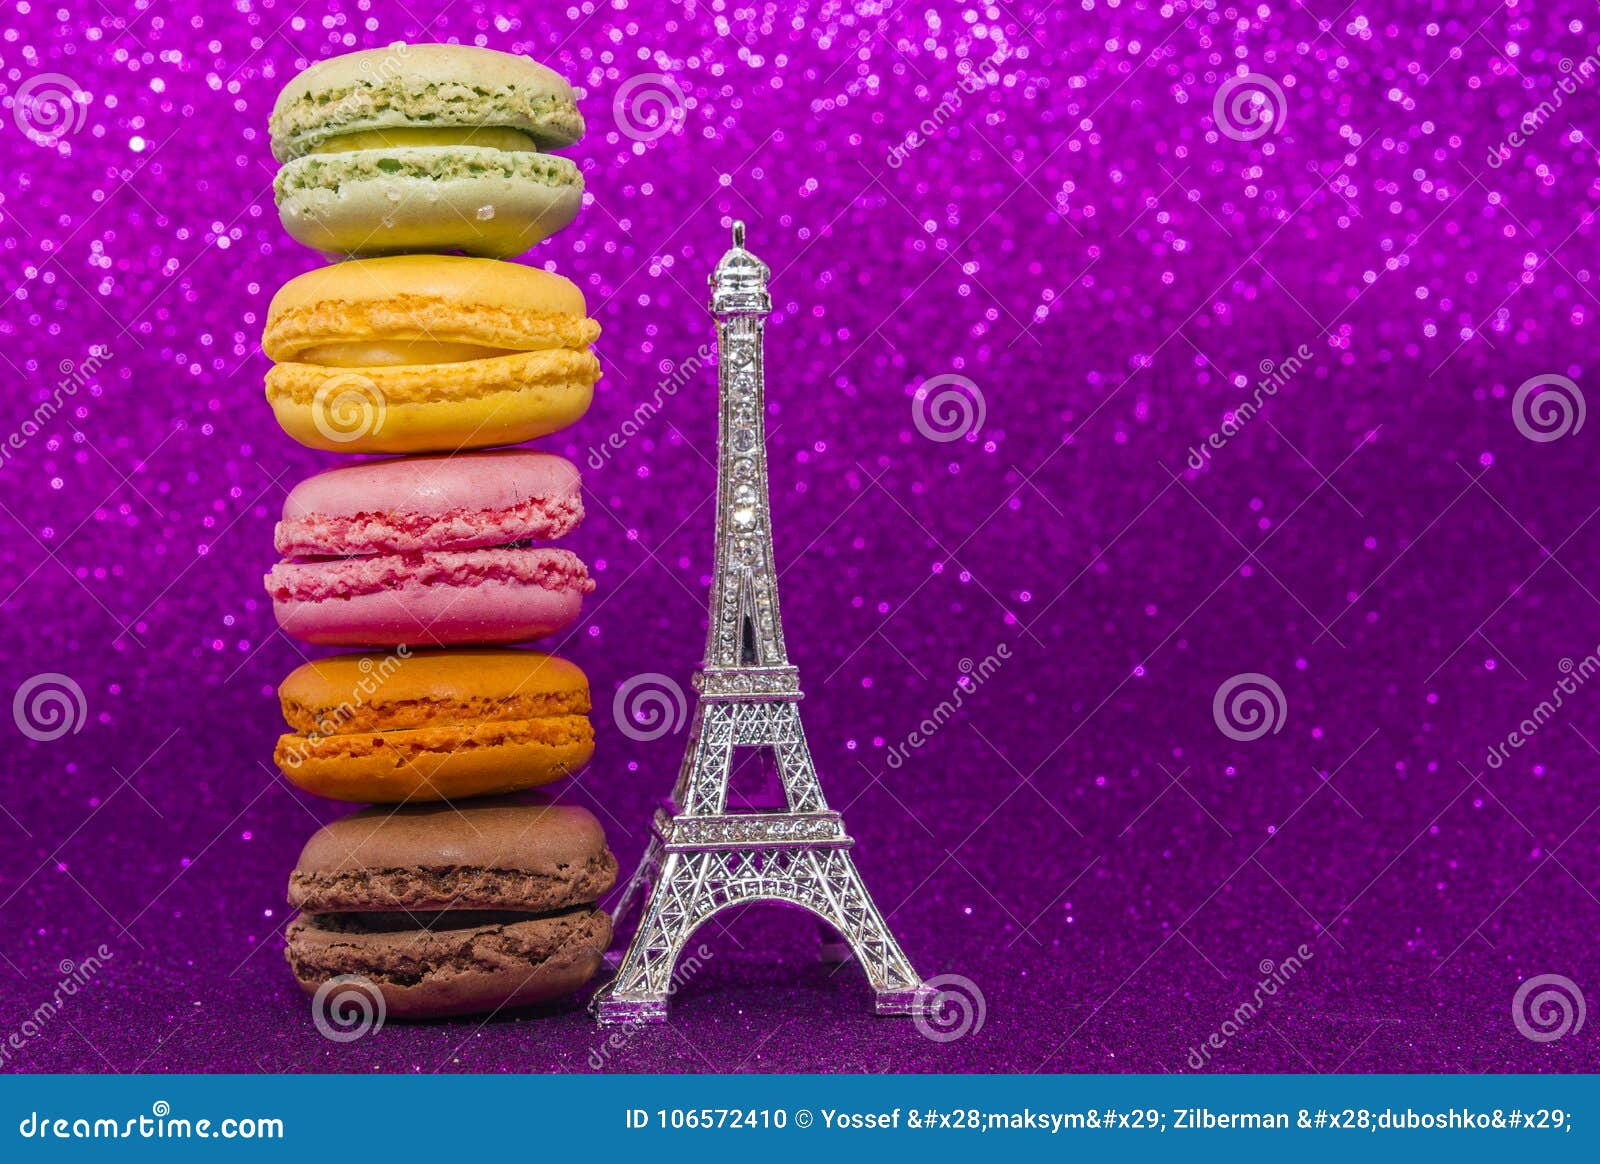 Top View of Colorful Macaron or Macaroon on Pink Background. Stock ...